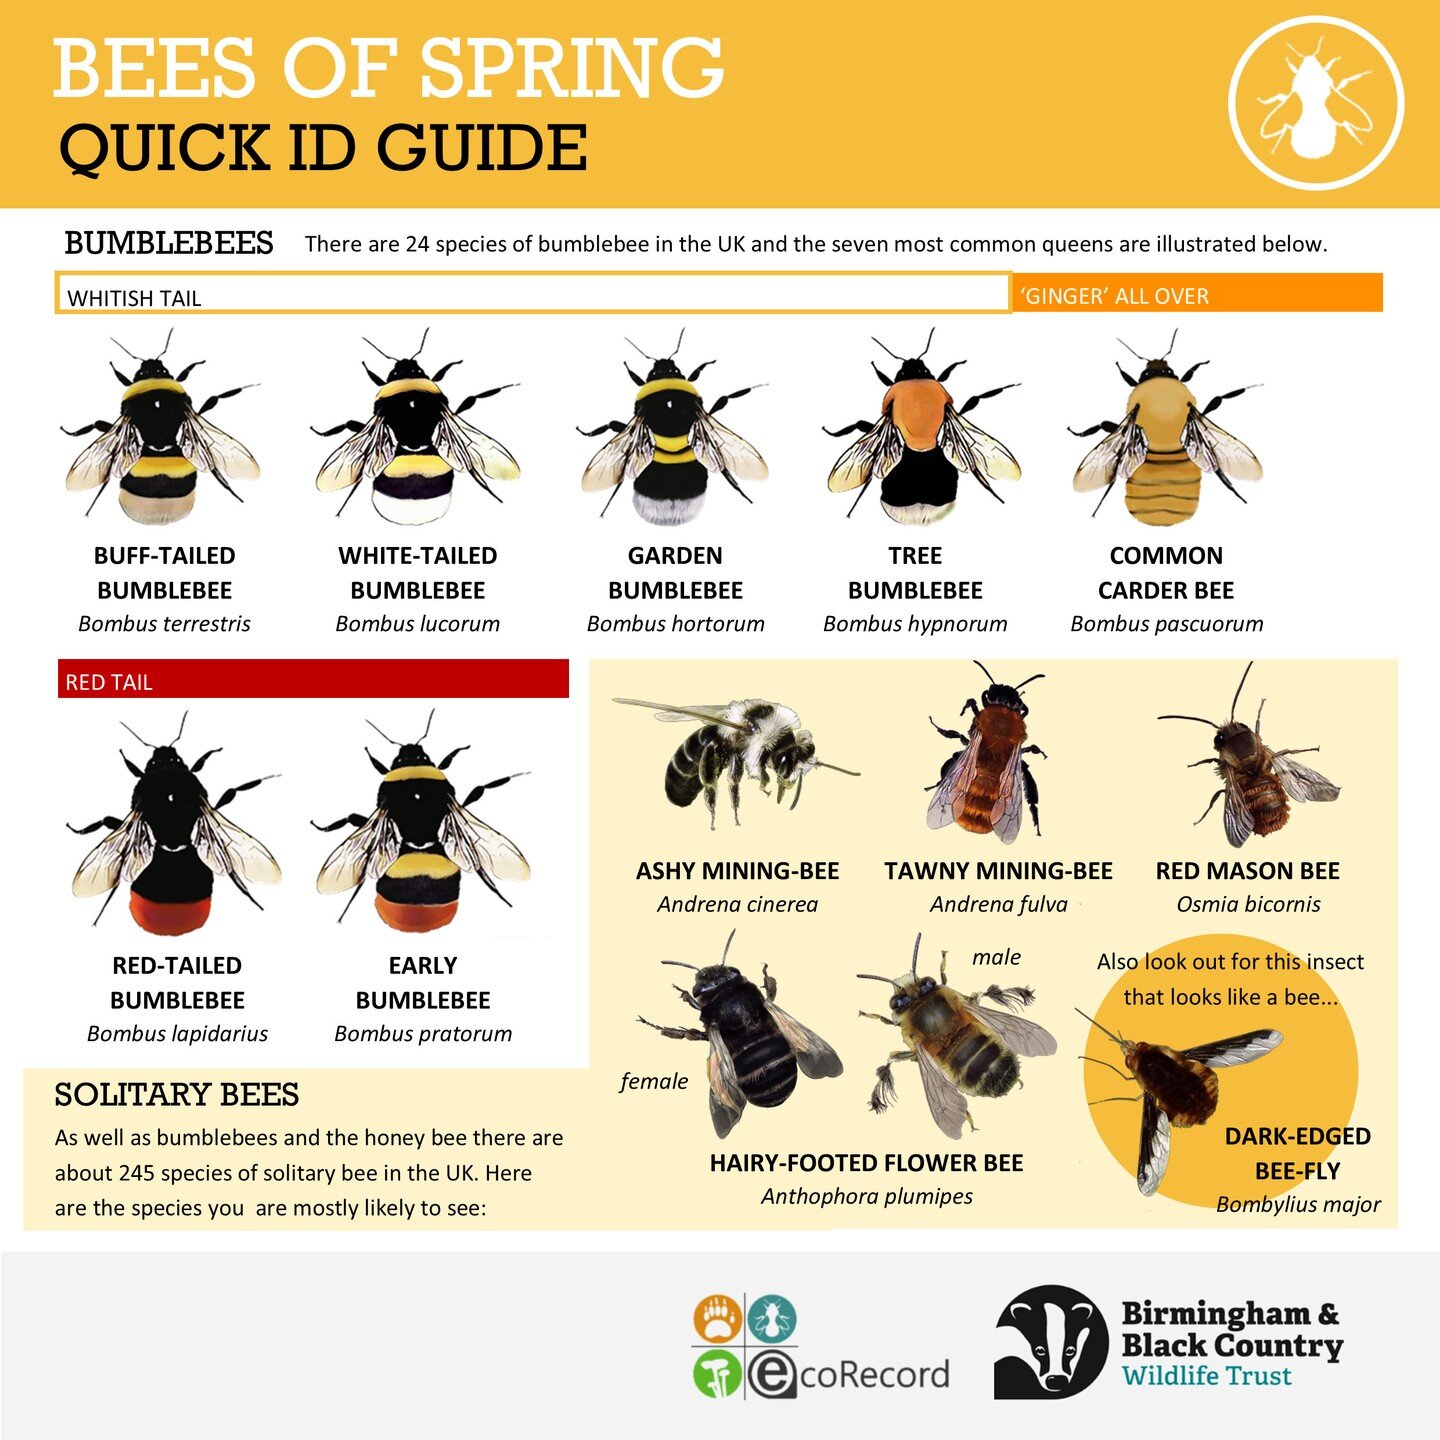 Spring is officially here and we are eagerly awaiting bee sightings! If you have seen any bees around please let us know! You can submit your sightings to us via iNaturalist, or iRecord, via the EcoRecord website at ecorecord.org.uk or by emailing us